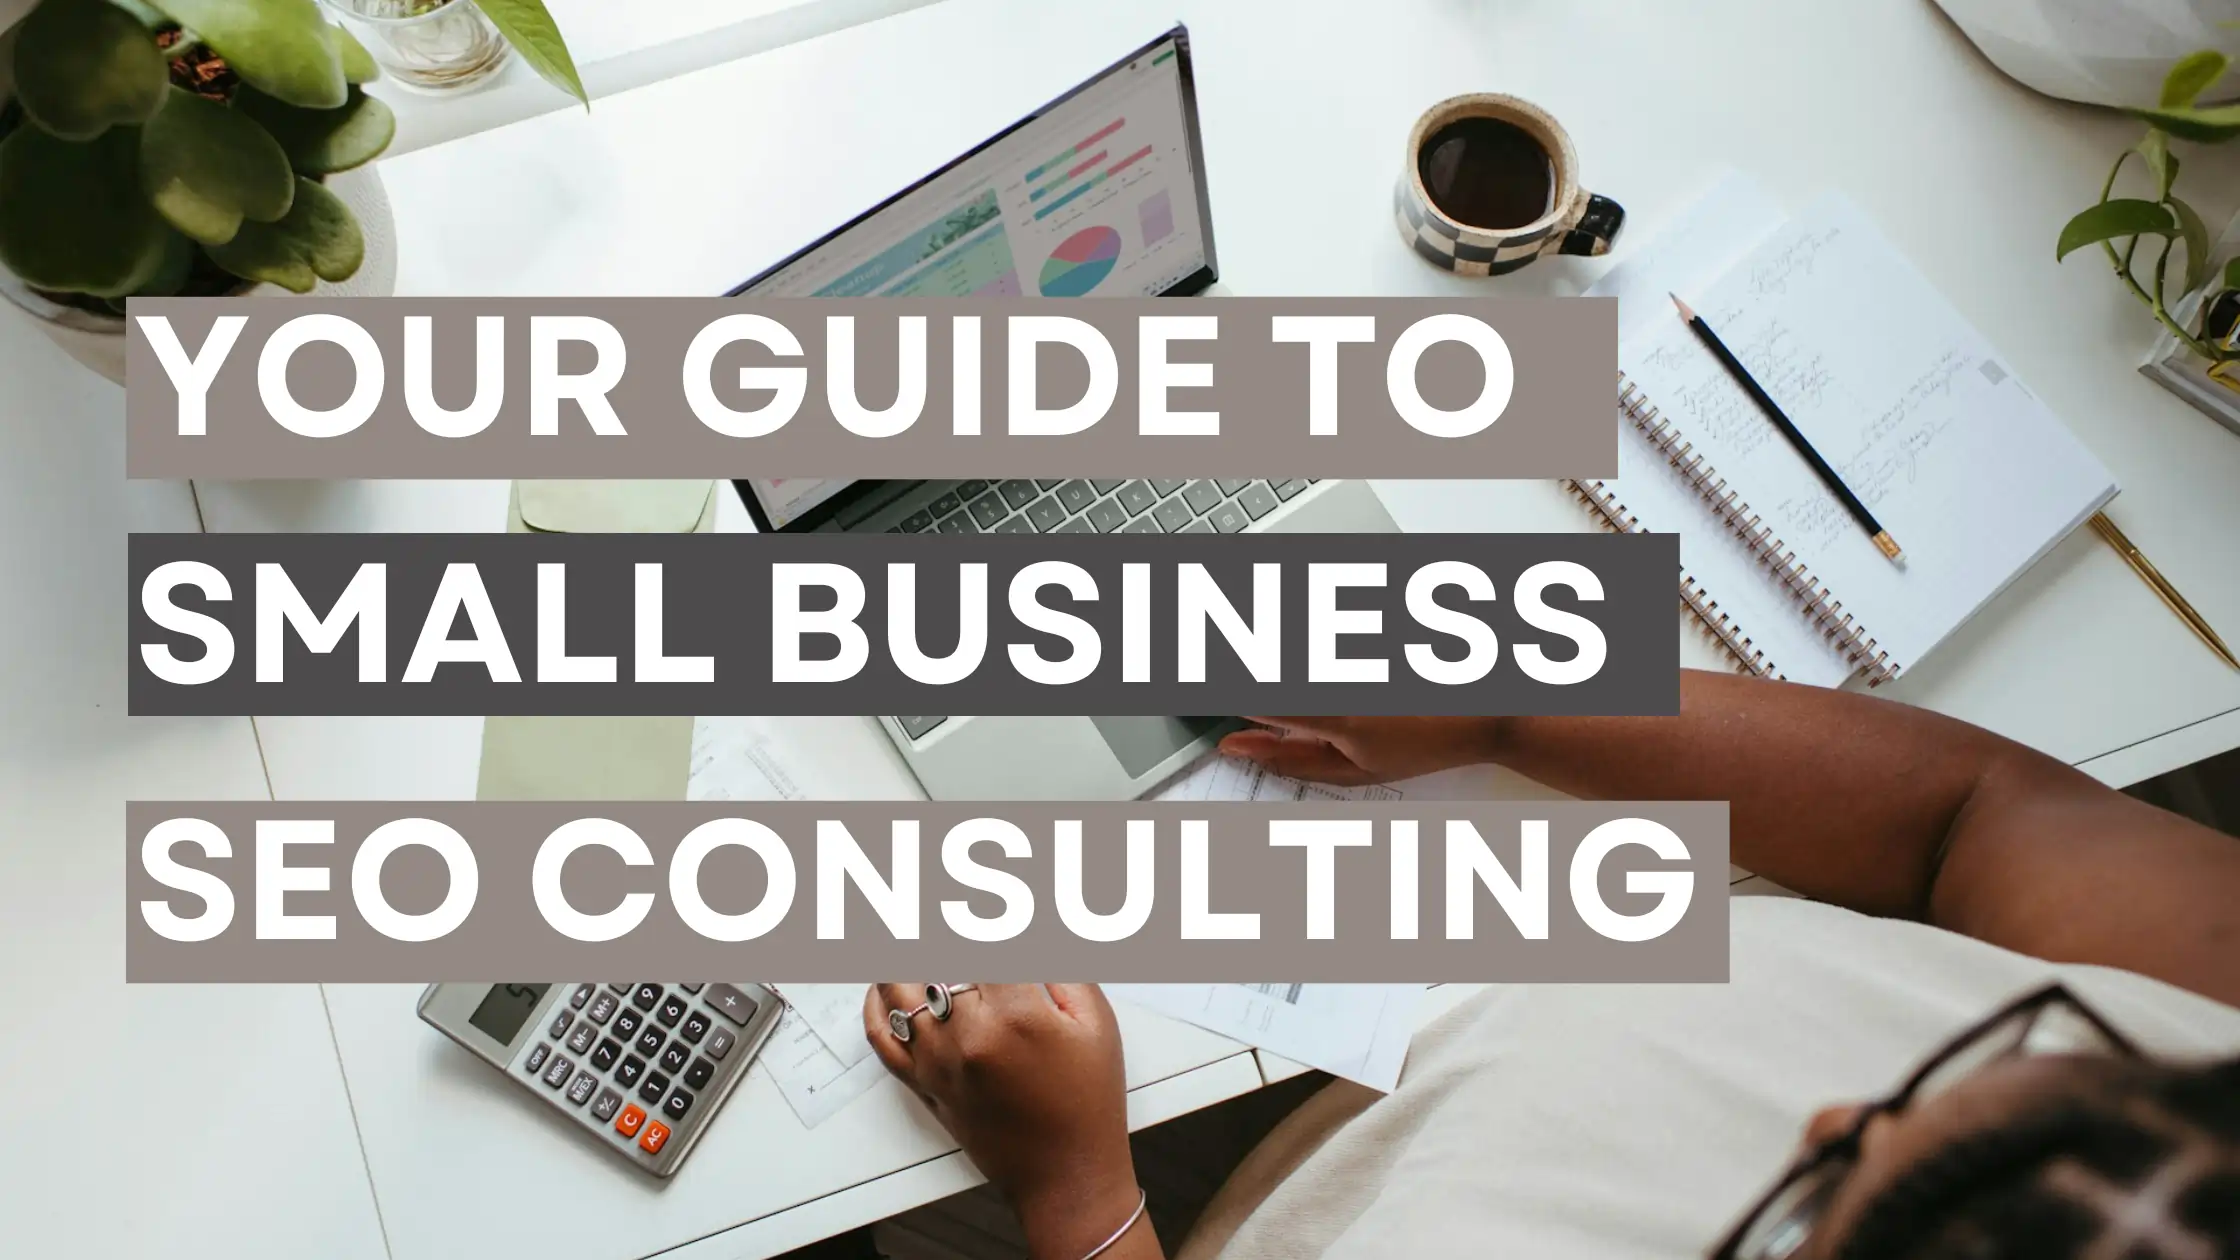 Your Guide to Small Business SEO Consulting